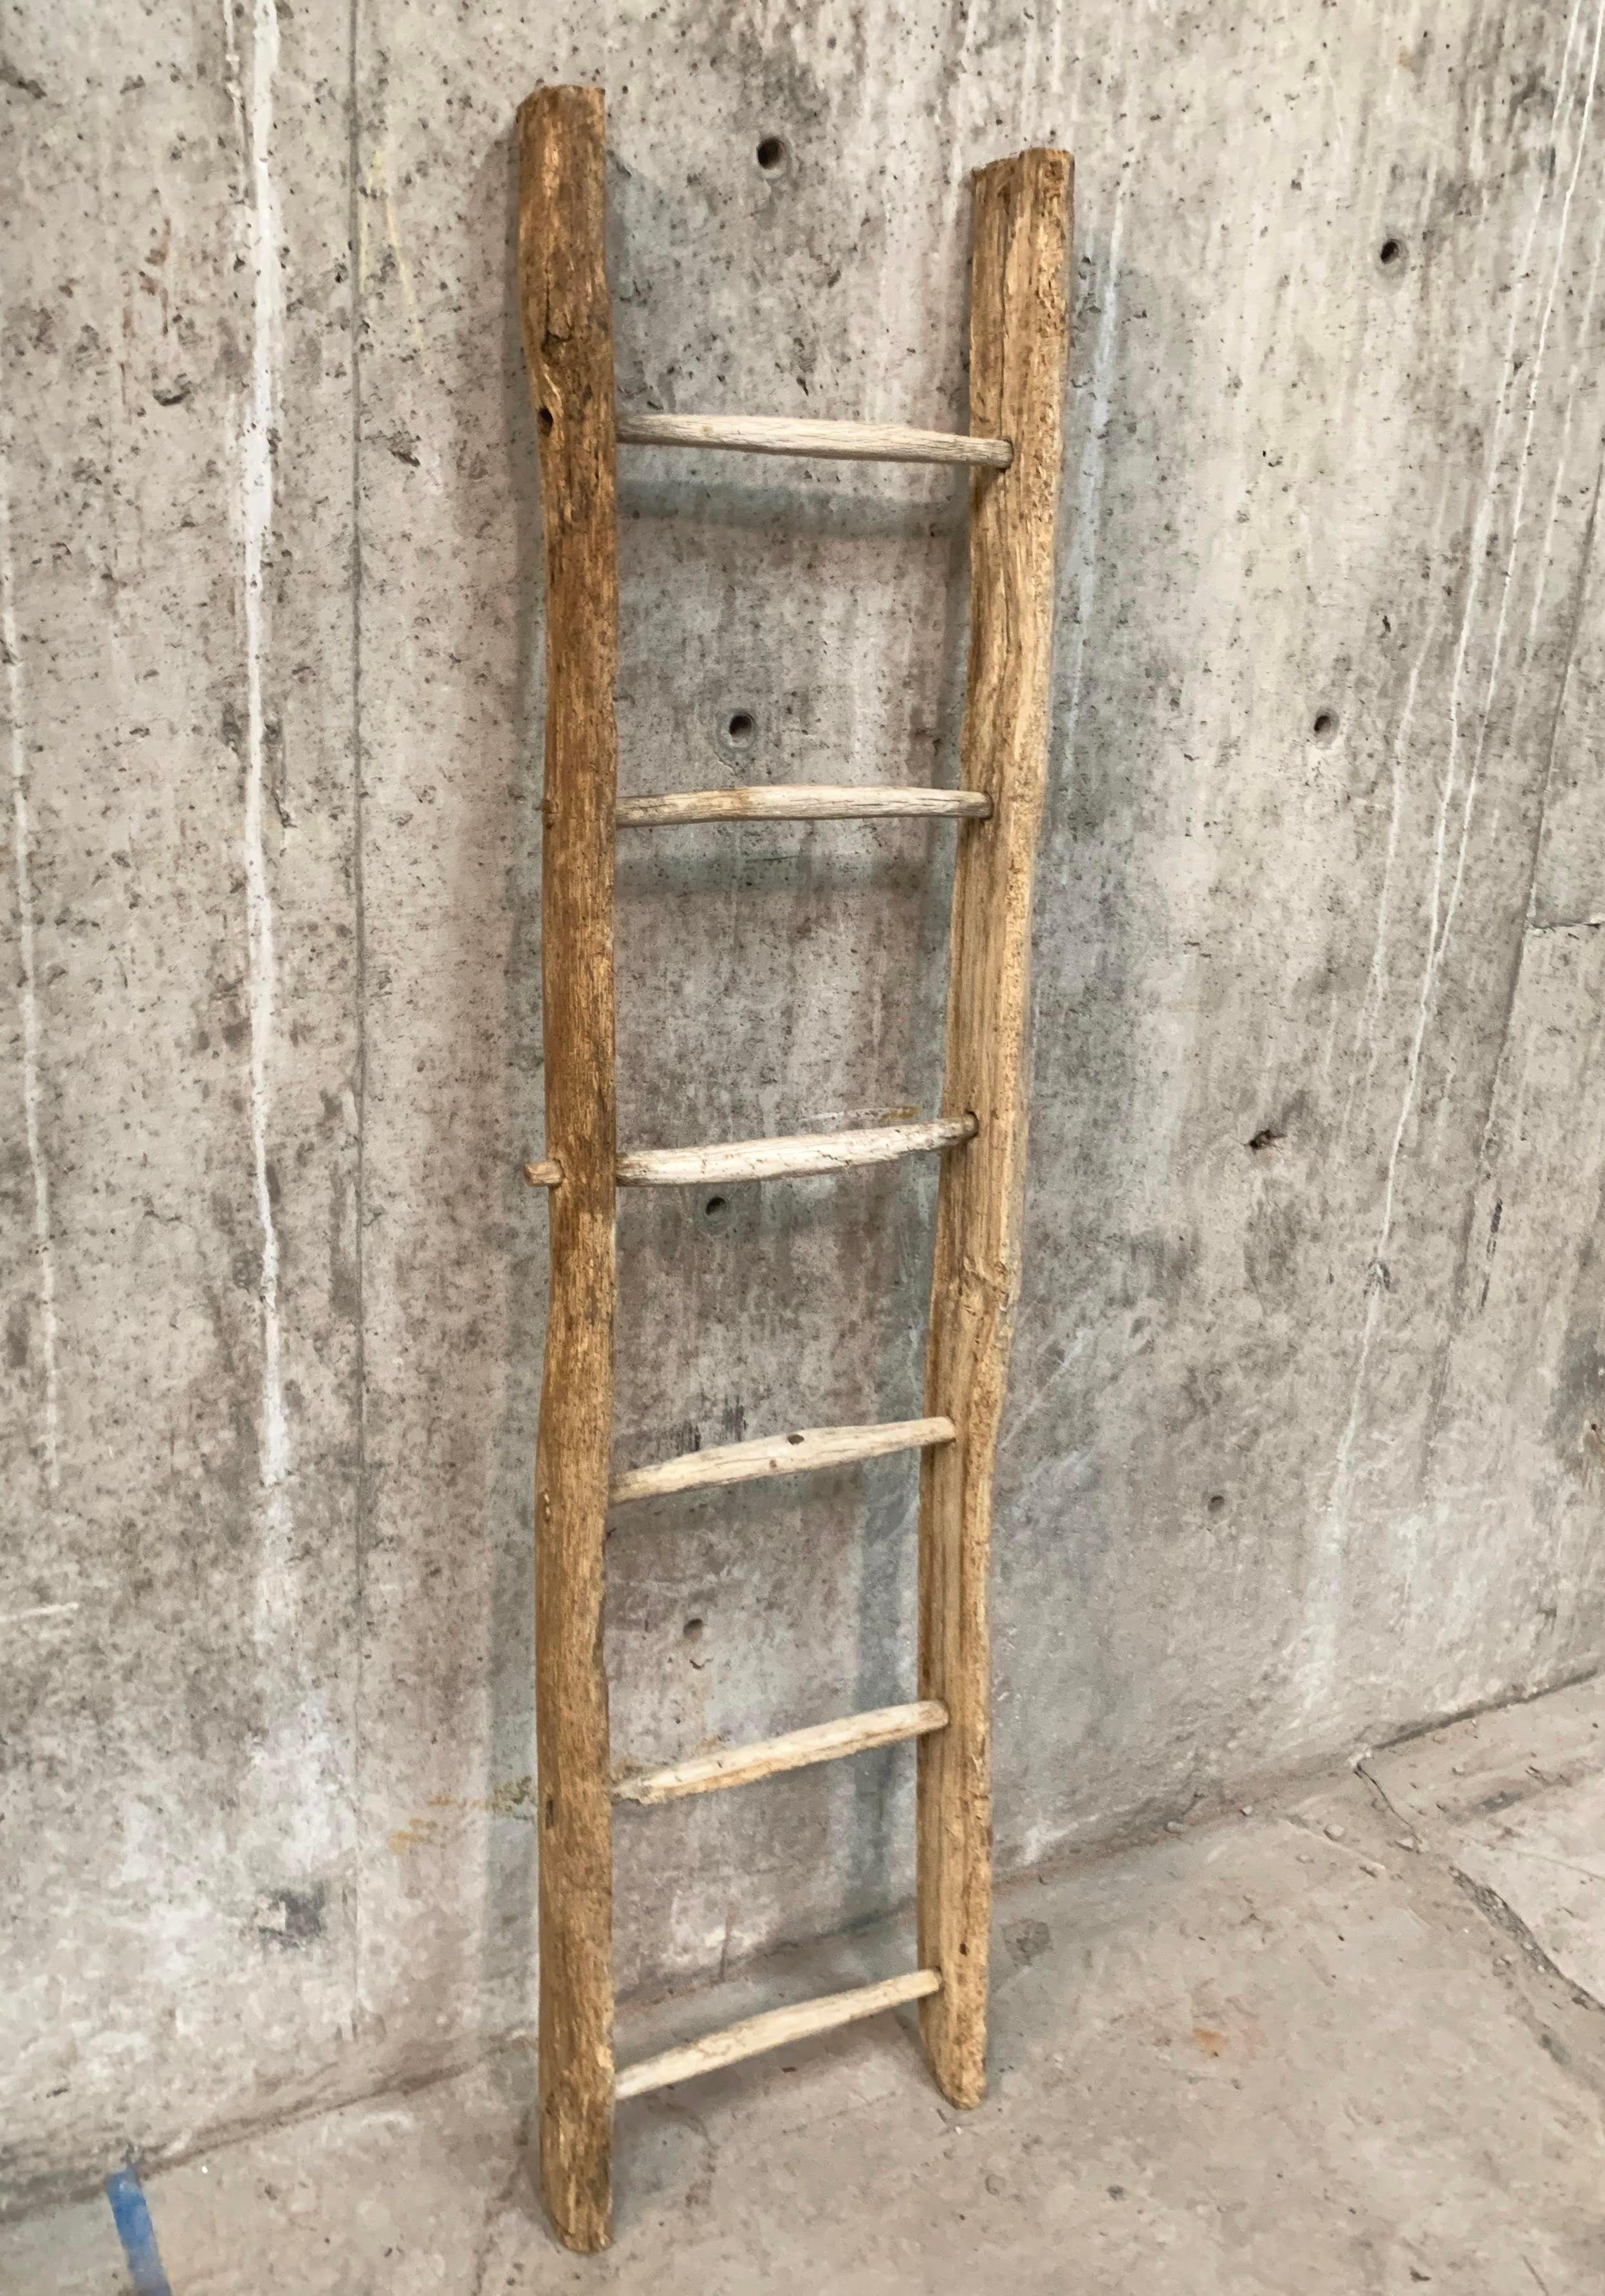 This antique French ladder was used on vineyards in Southwestern France. It can be used as a rack for additional storage (such as in a bathroom for towels) or as a decorative accent.

Acquired on a buying trip to France in 2019.